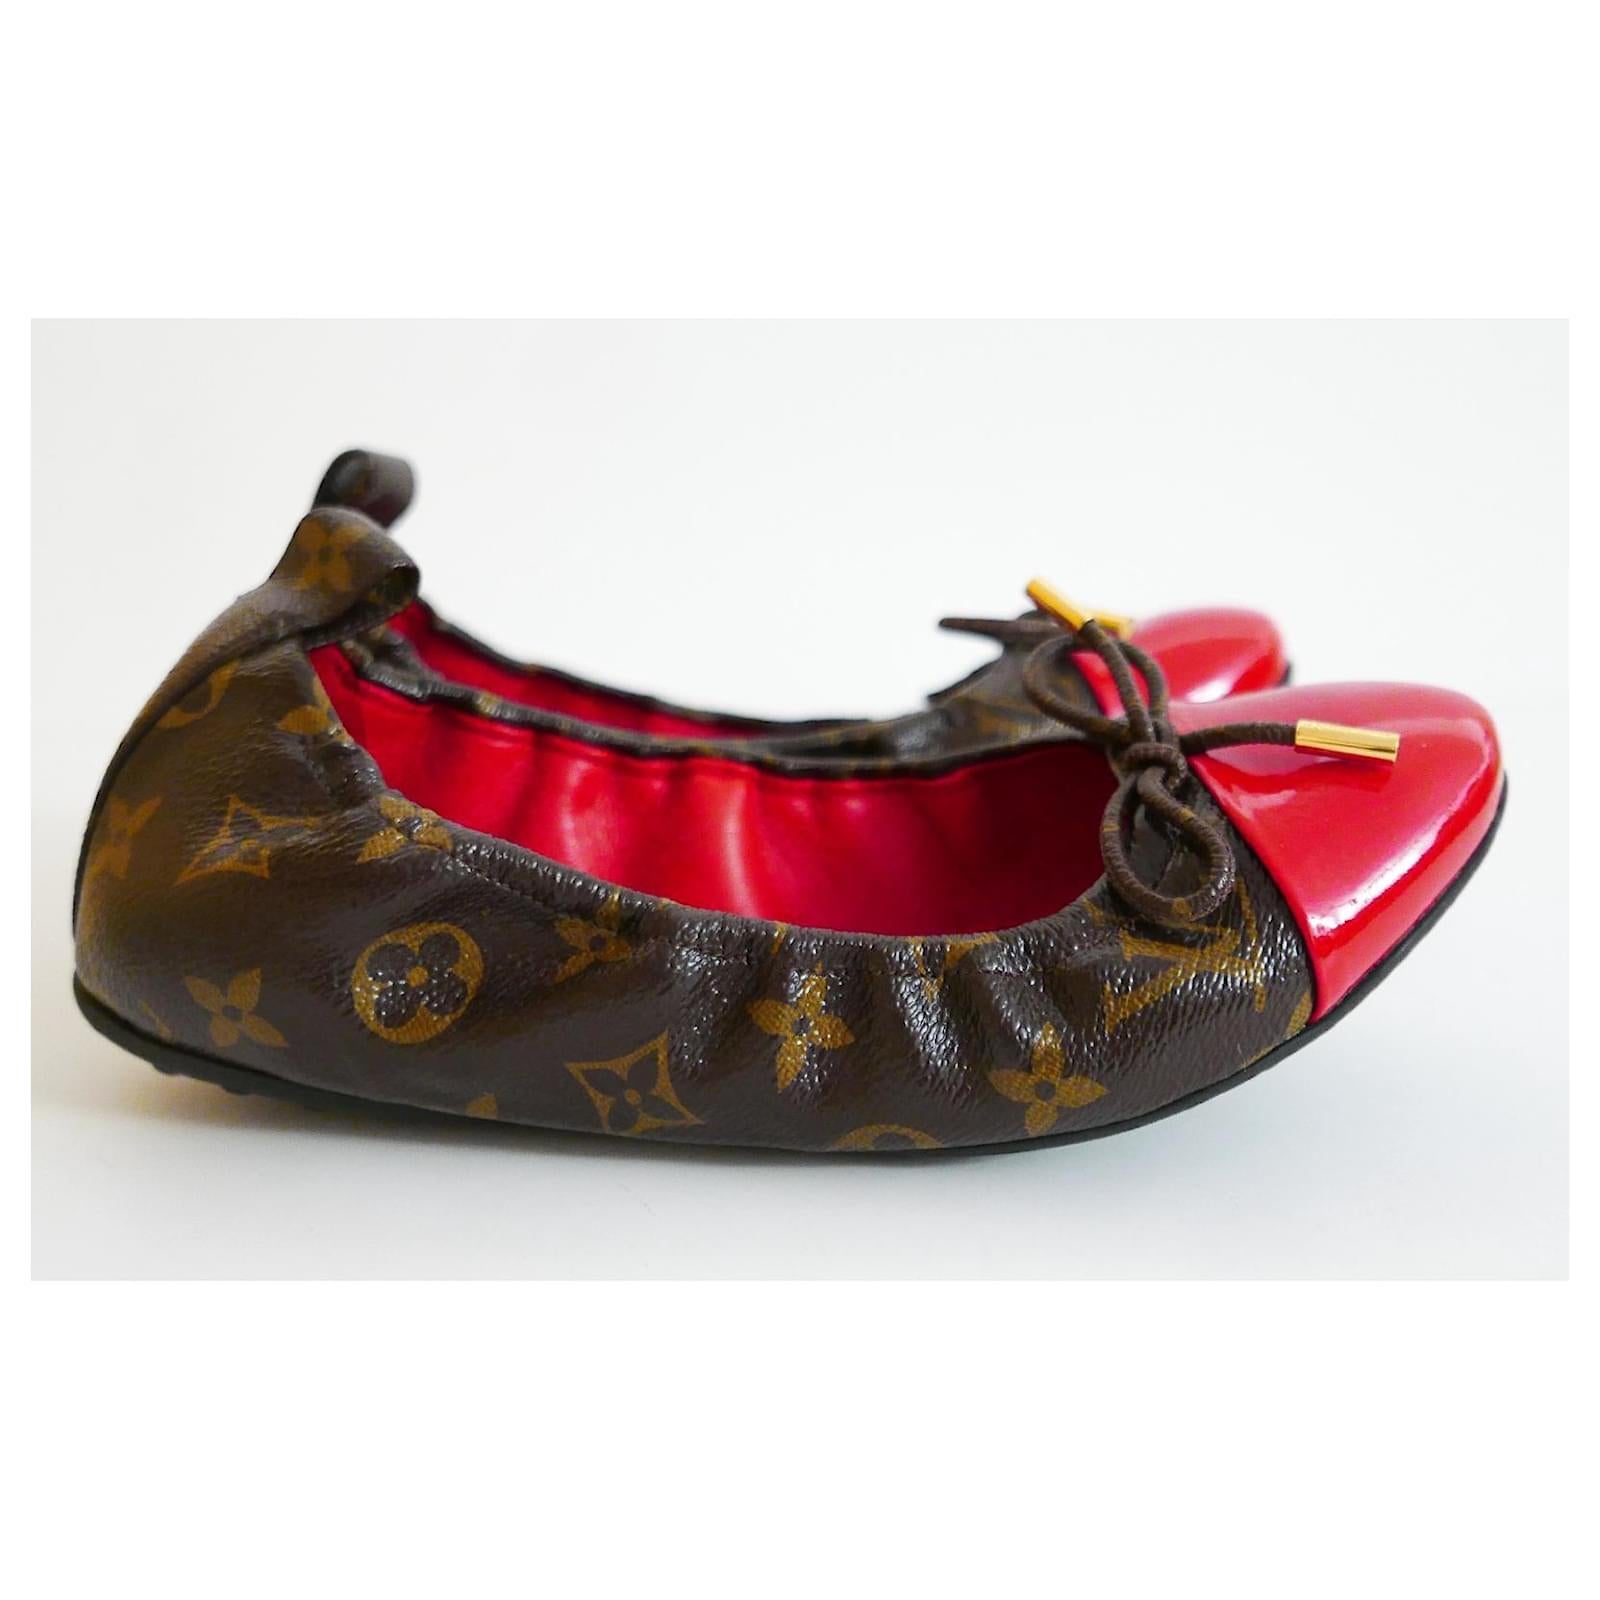 Cute and chic Louis Vuitton Flirty ballet flats. Unworn with dustbag. Made from signature monogram canvas with a glossy red patent leather toe caps and bow trims with etched goldtone tips. Have elasticated sides and semi flexible soles. size 38M.